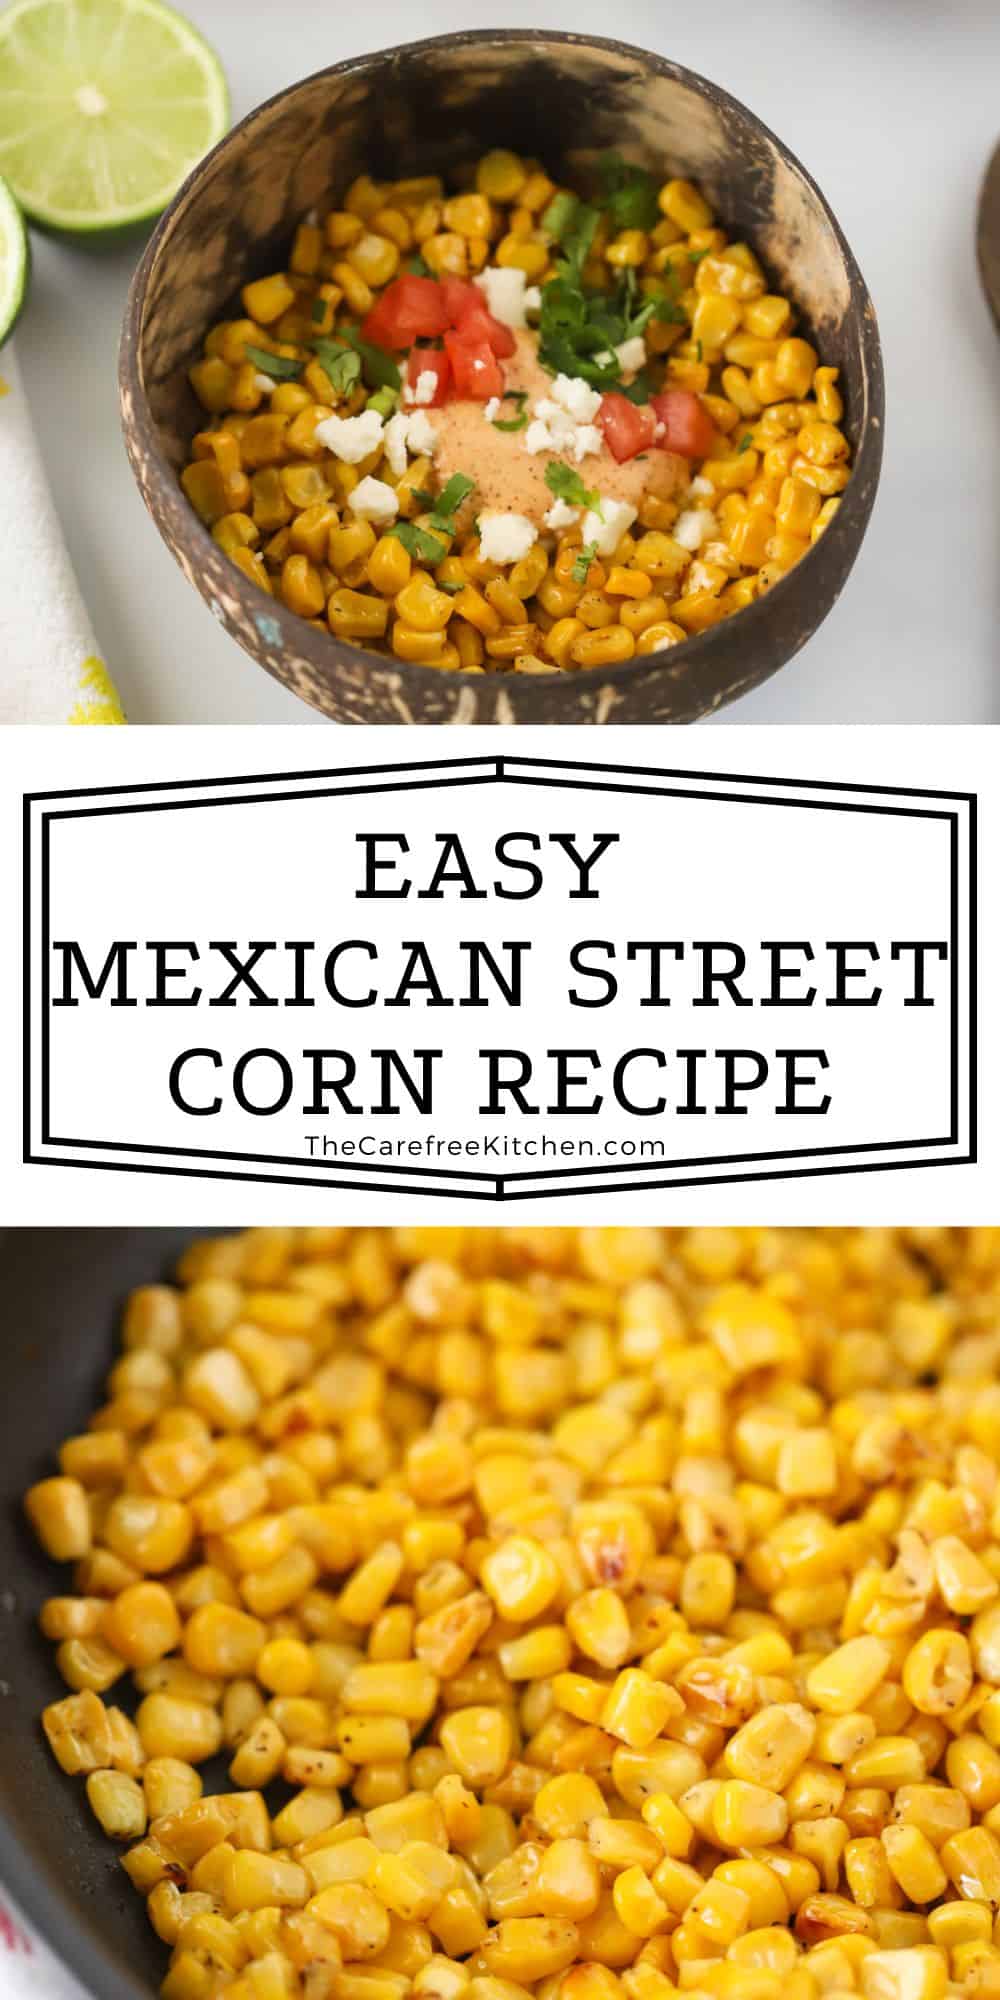 Best Mexican Street Corn Recipe - The Carefree Kitchen